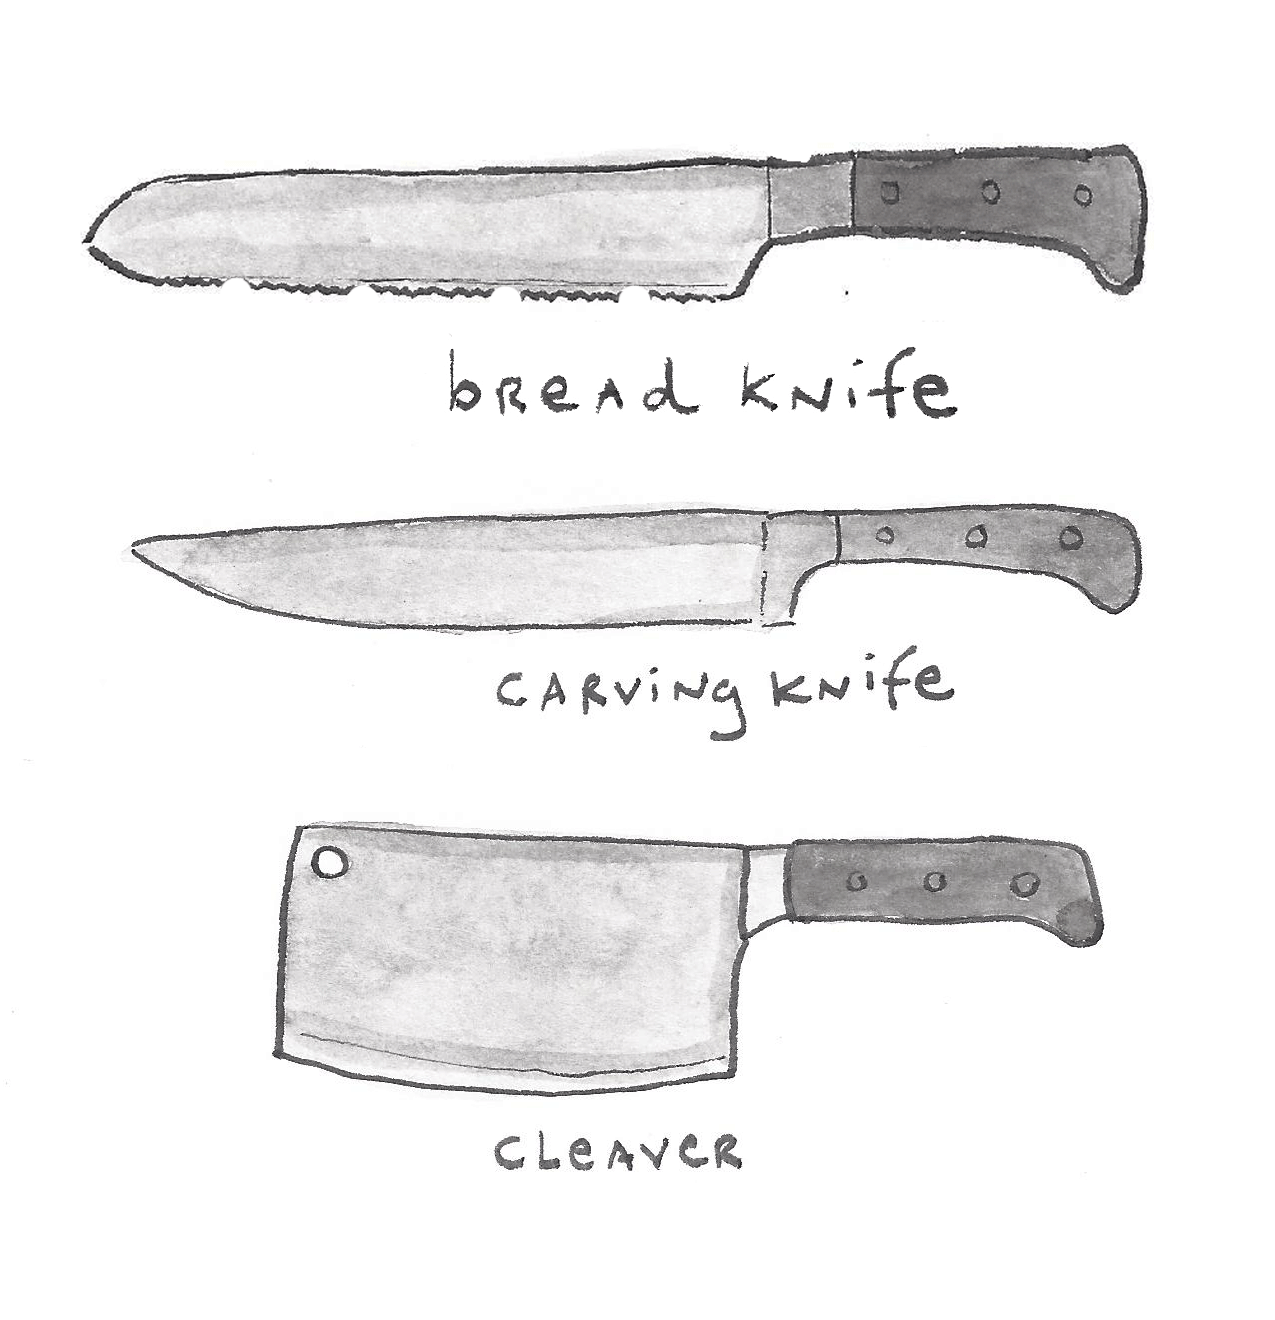 Different Types of Knives: An Illustrated Guide